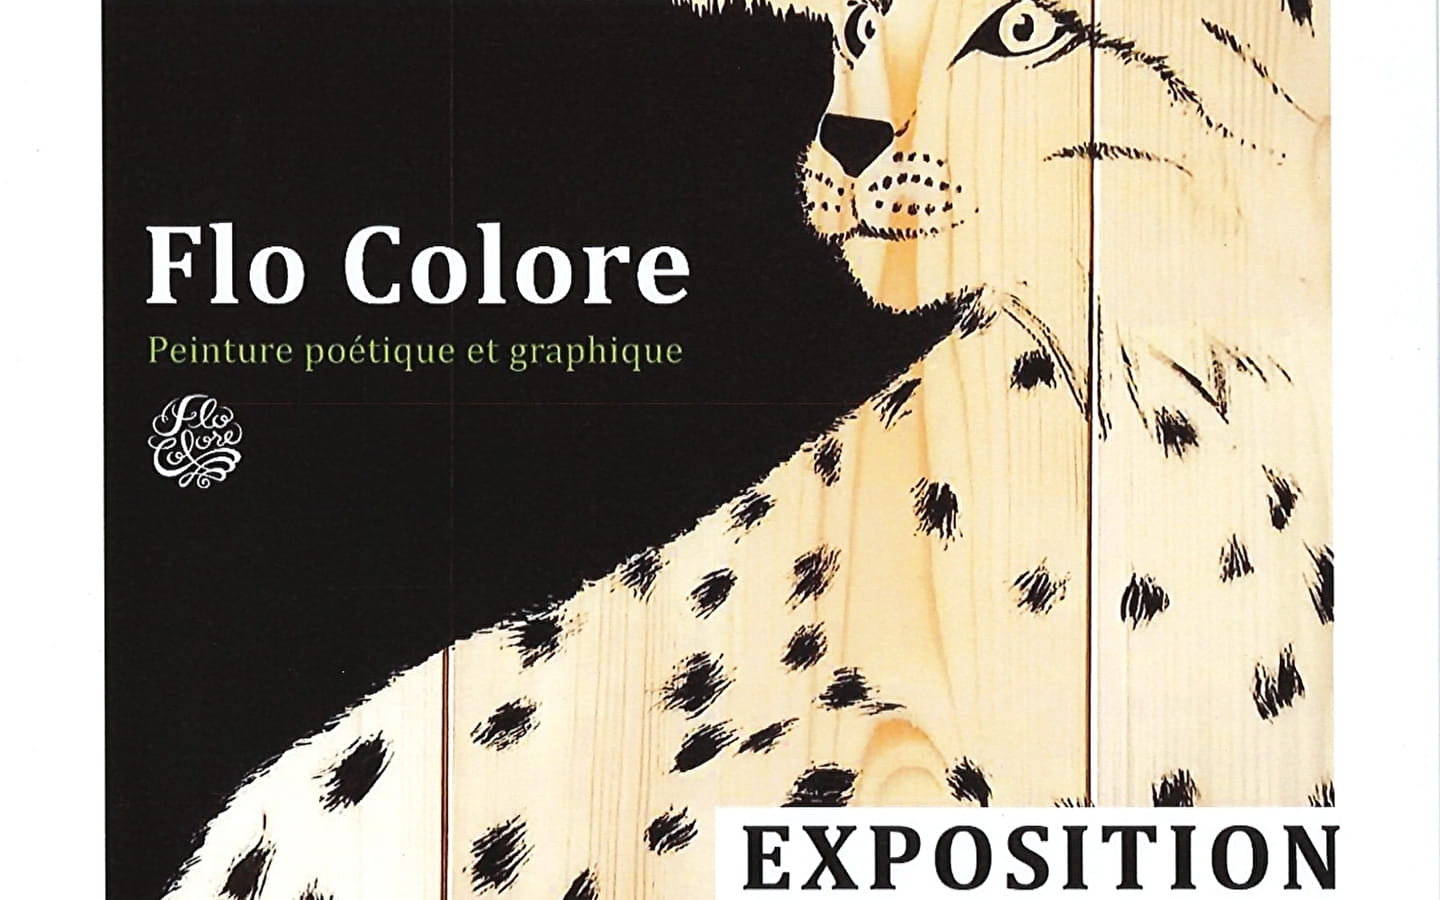 Exhibition: Flo Colore, poetic and graphic painting.